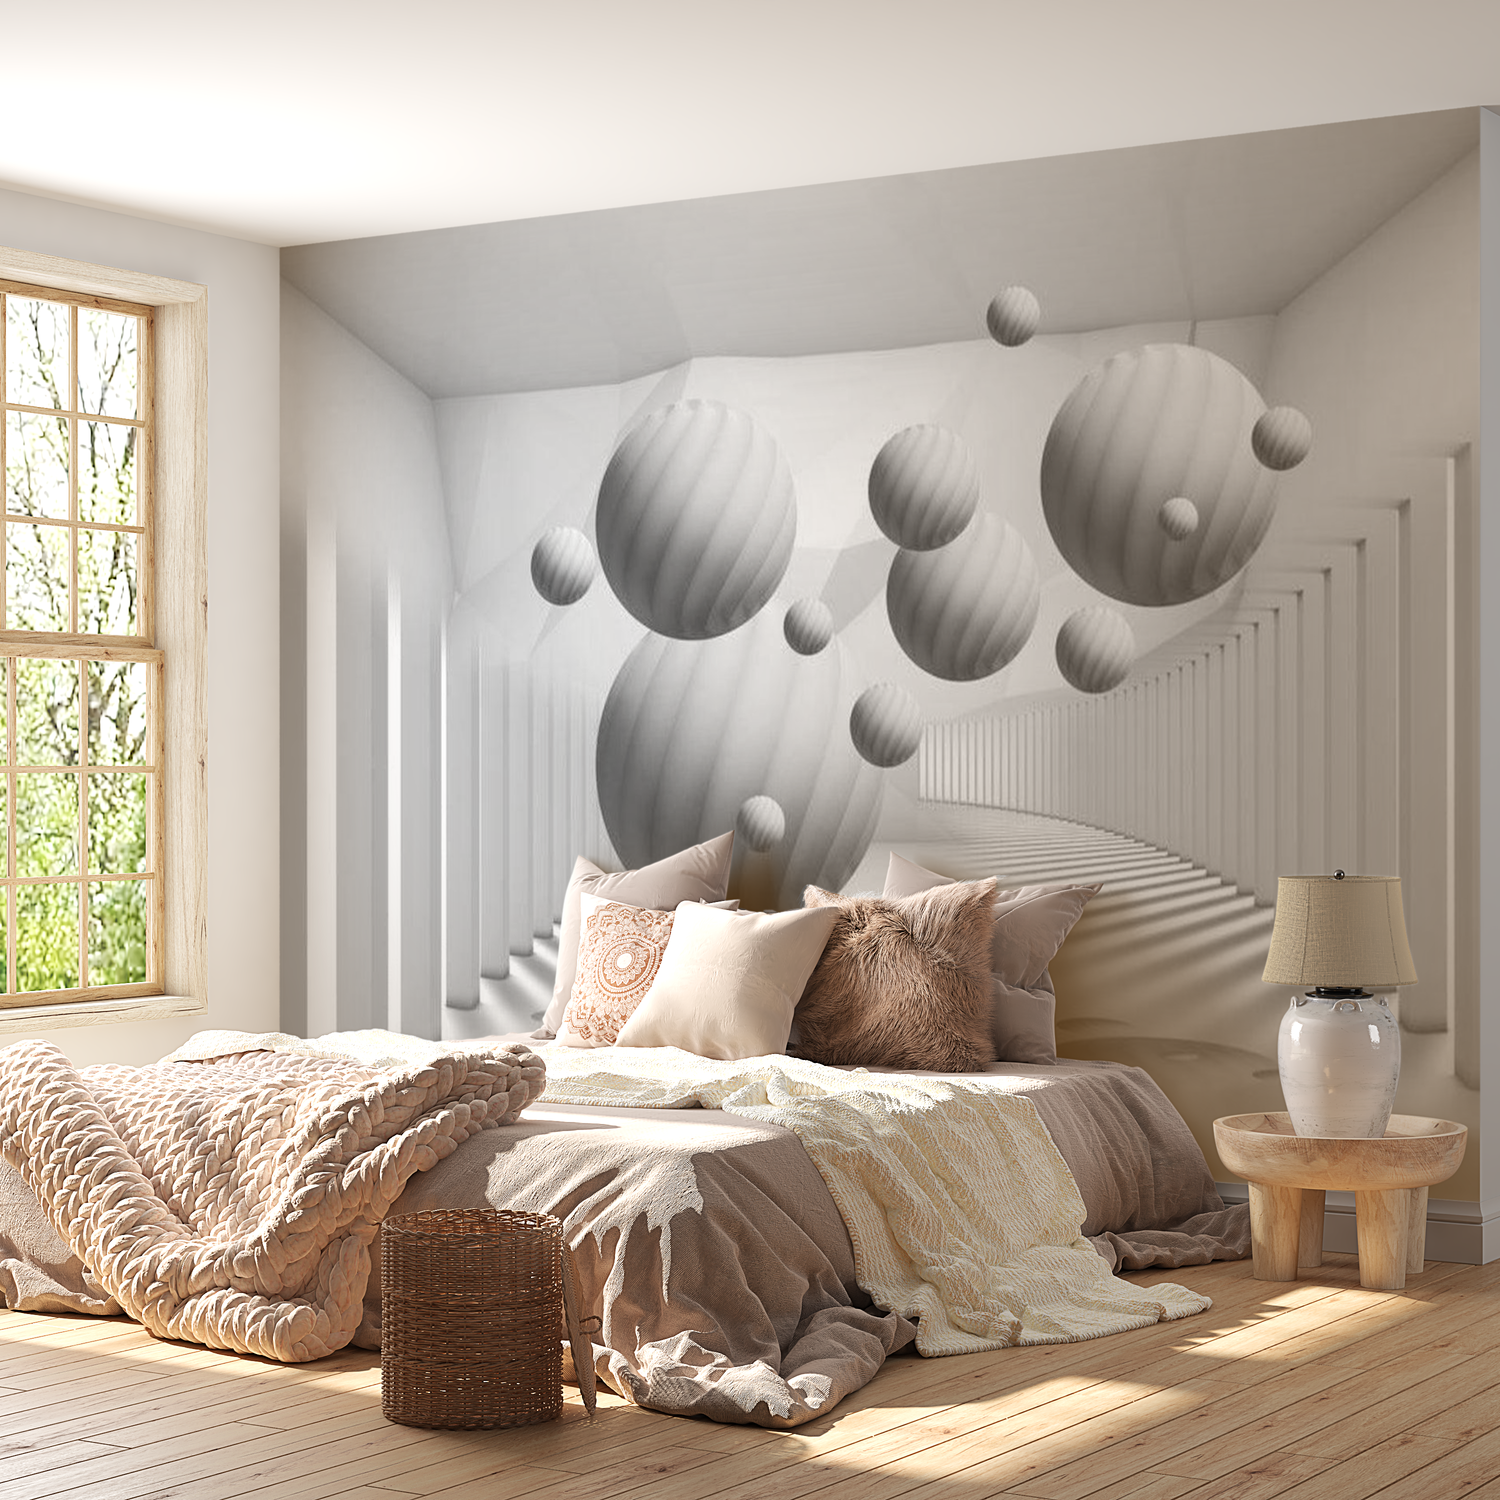 3D Illusion Wallpaper Wall Mural - Balls In White 39"Wx27"H